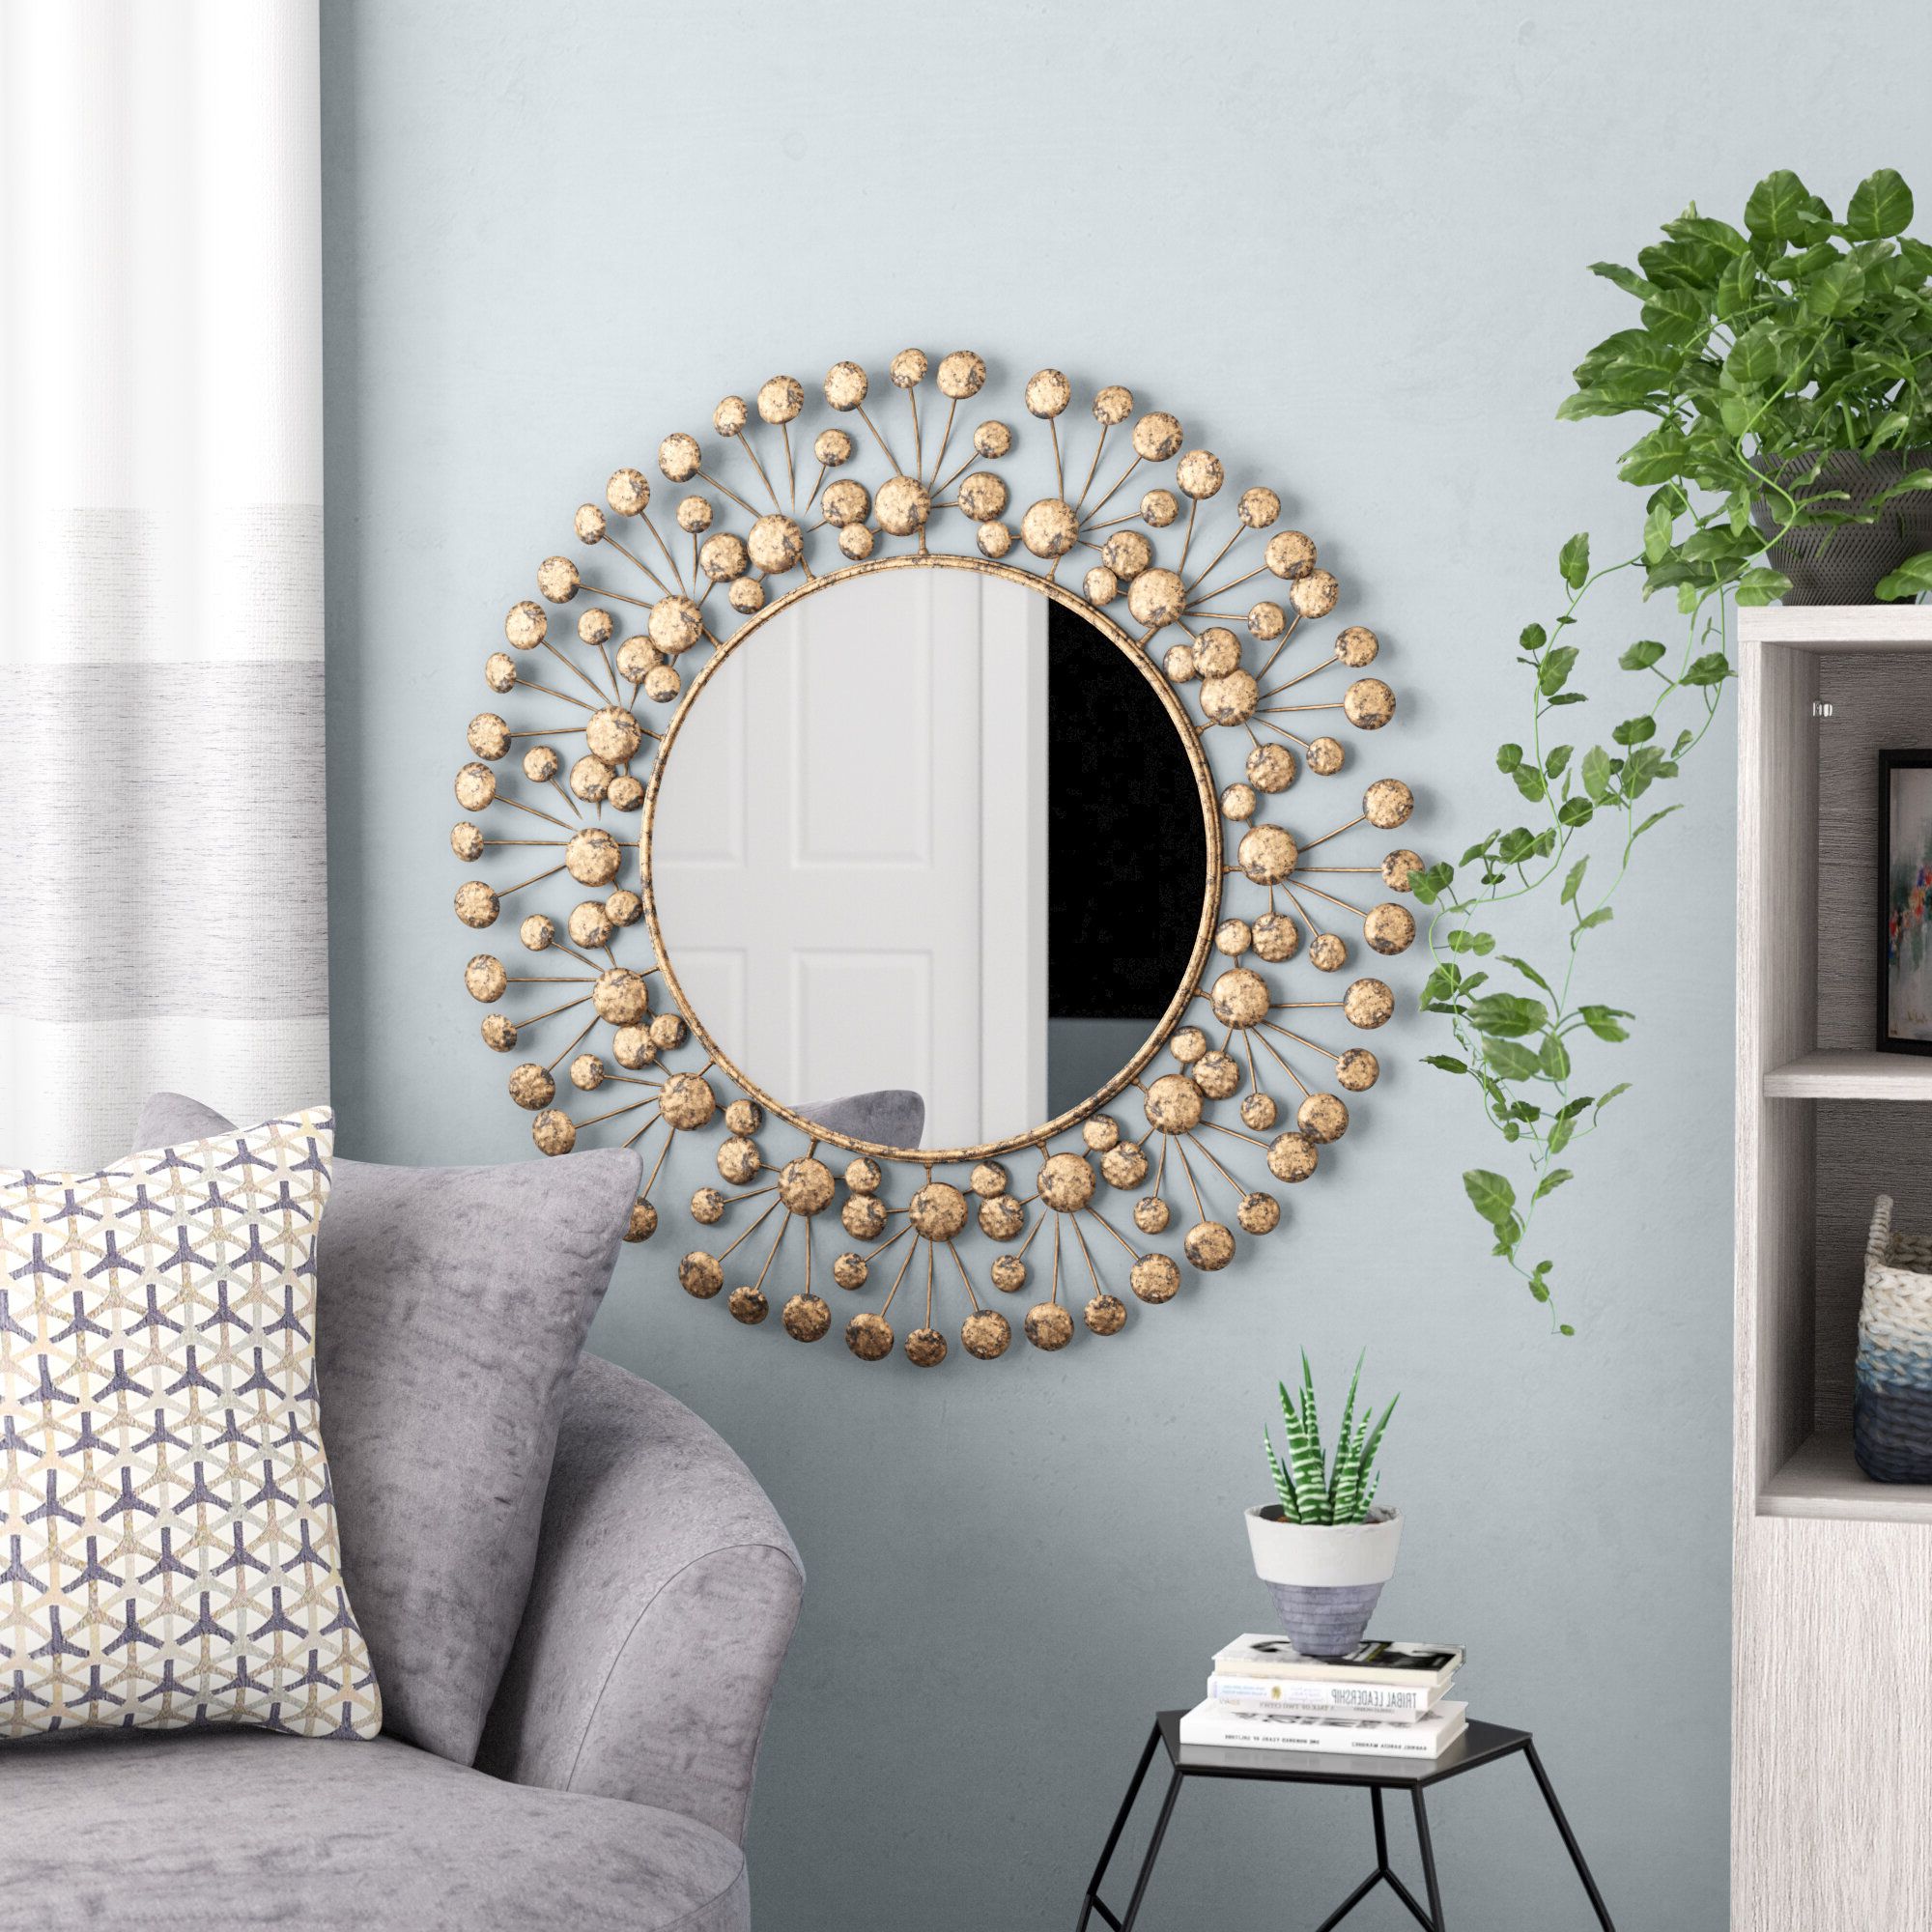 Hanging Wall Mirror: An Unmissable Reflection Of Style